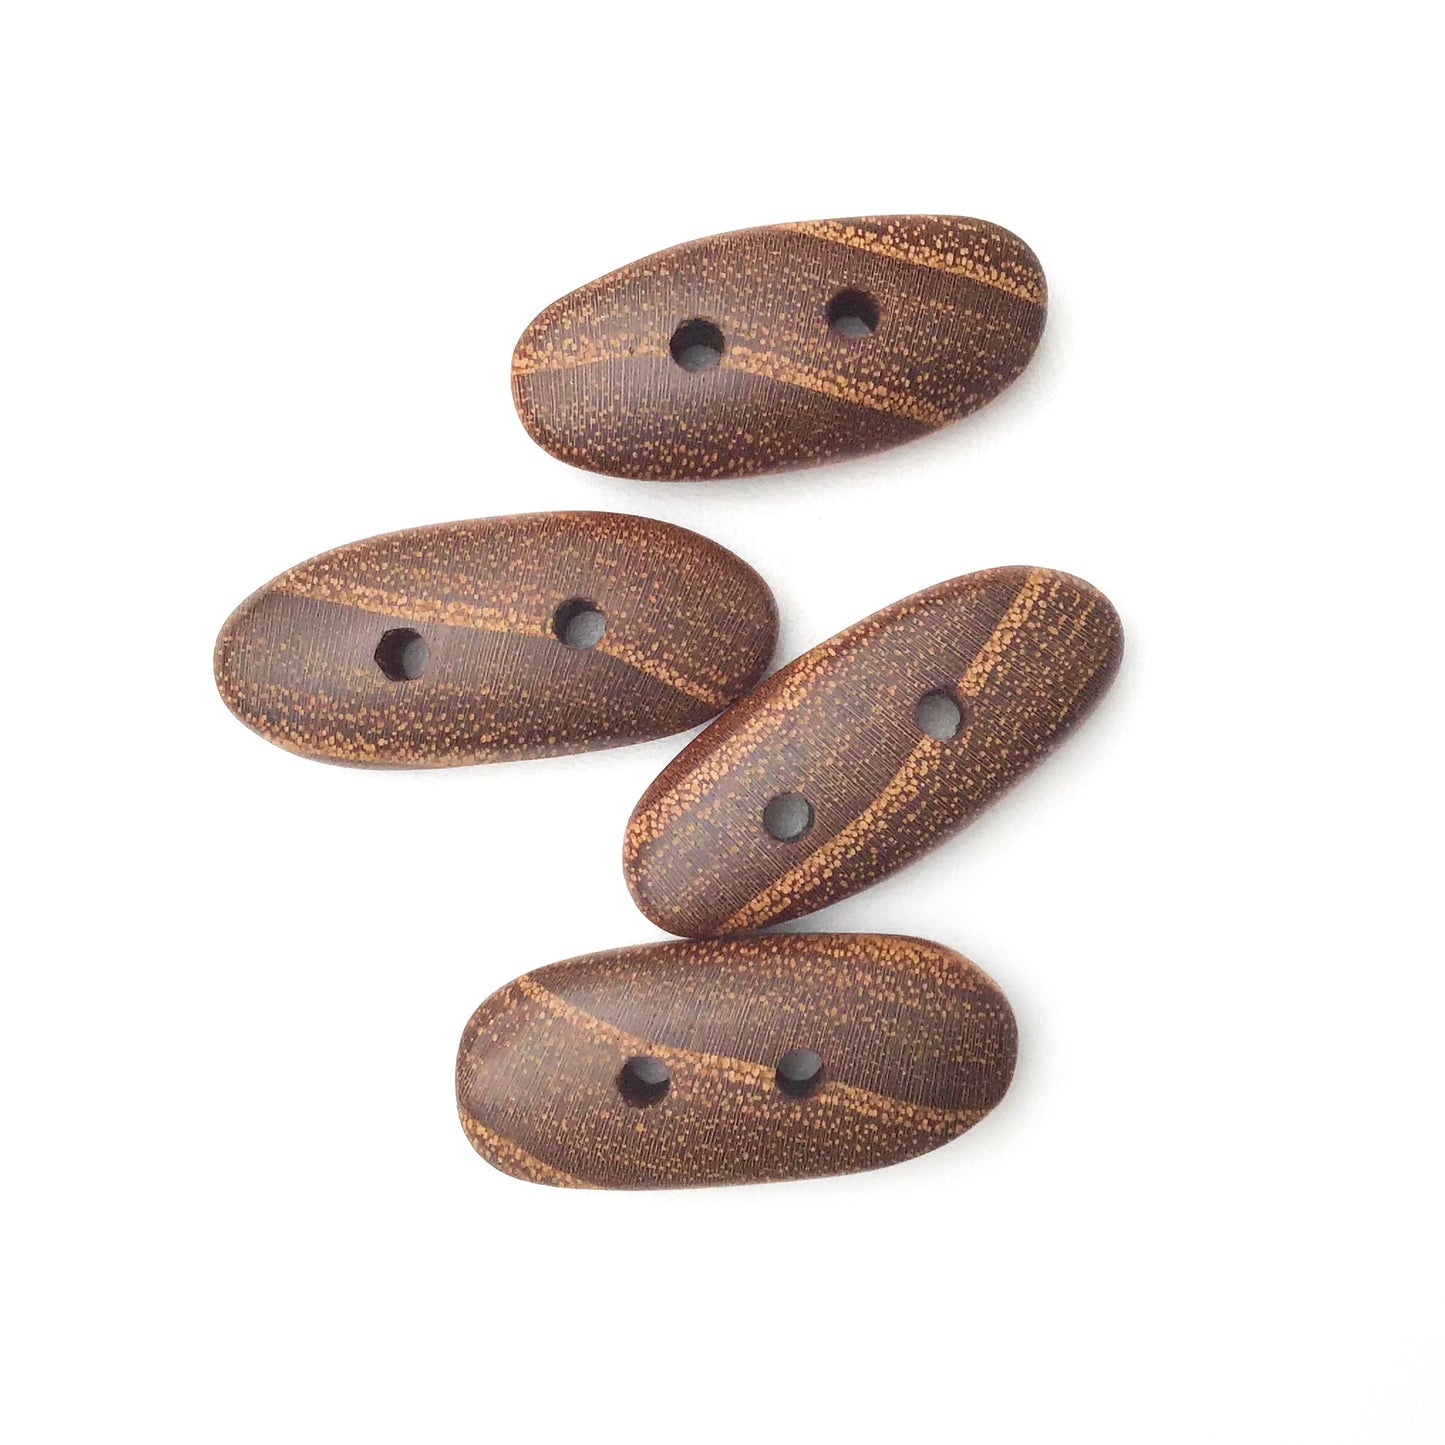 Black Locust Wood Buttons - Wooden Toggle Buttons - 5/8" X 1 3/8" - 4 Pack